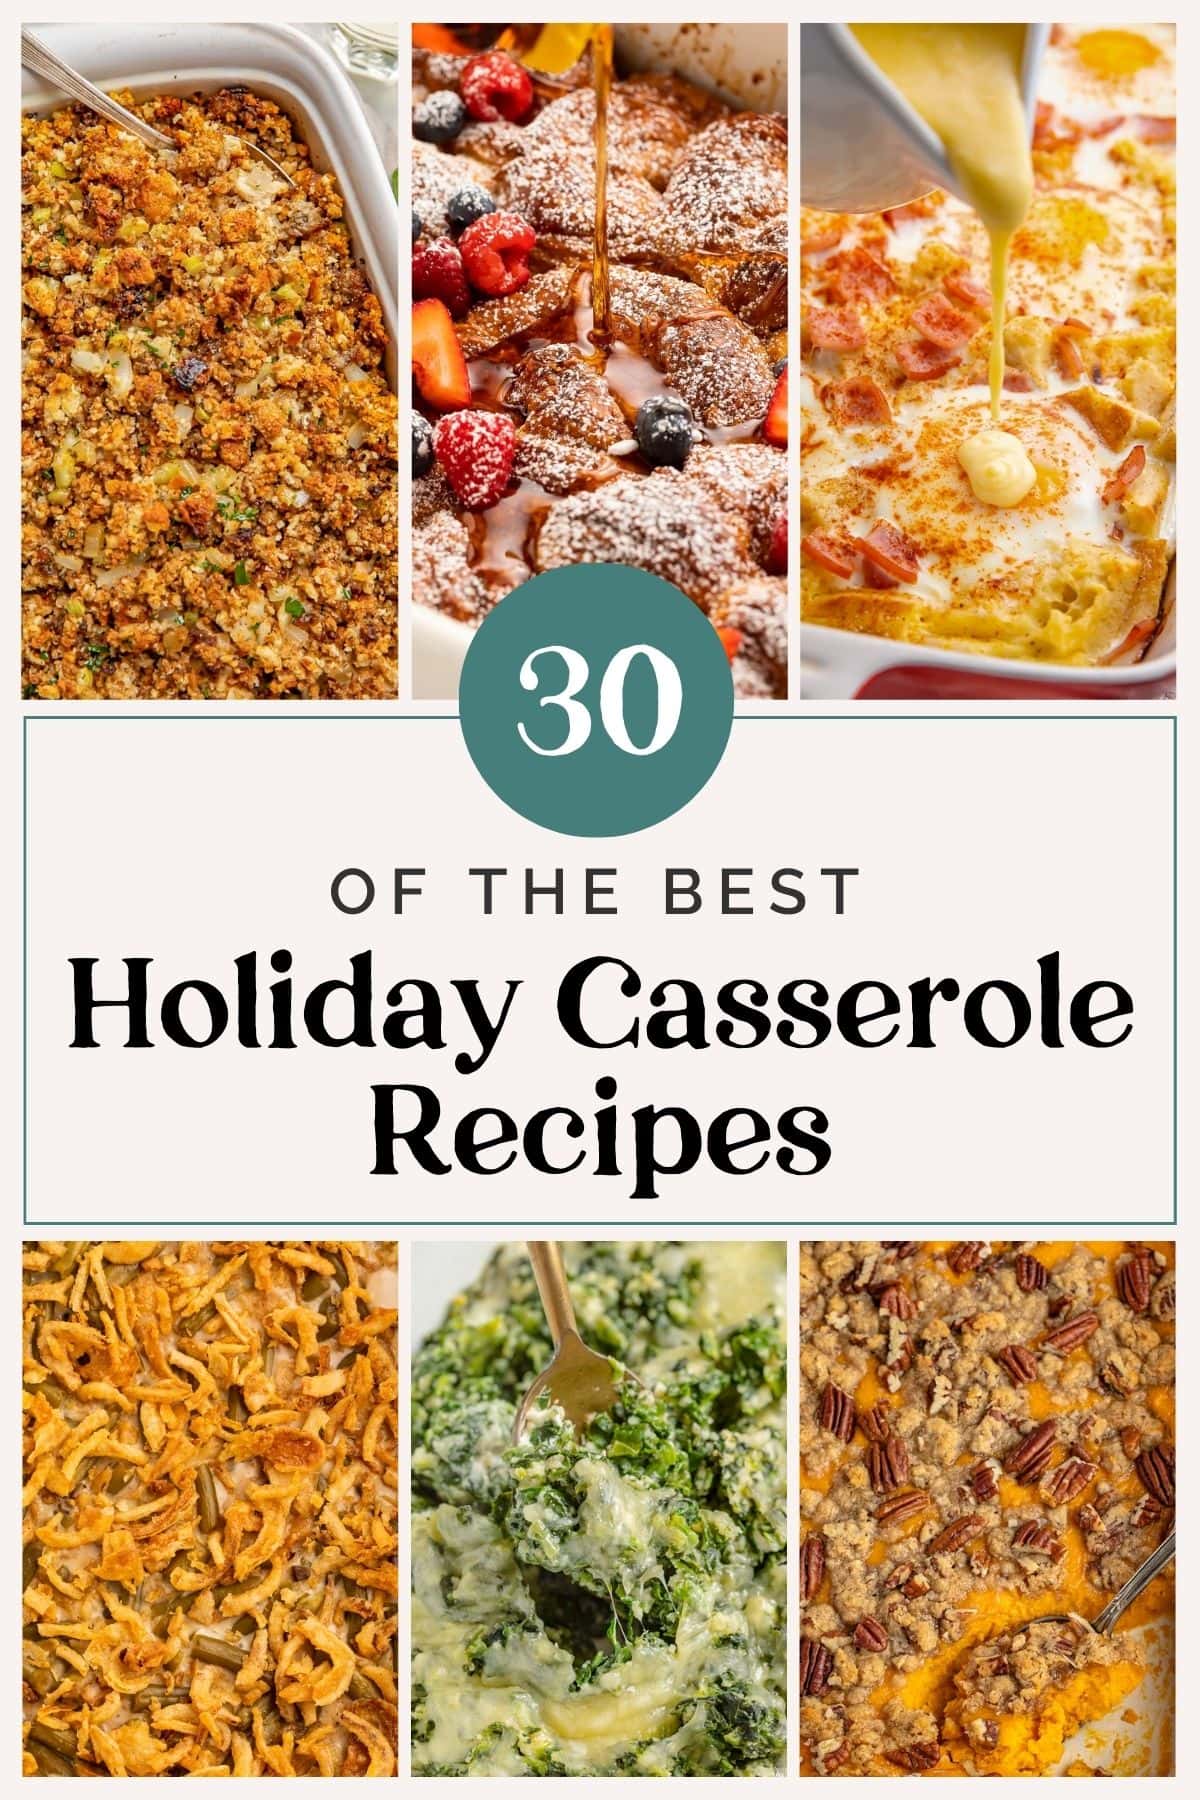 Graphic for 30 best holiday casseroles roundup.